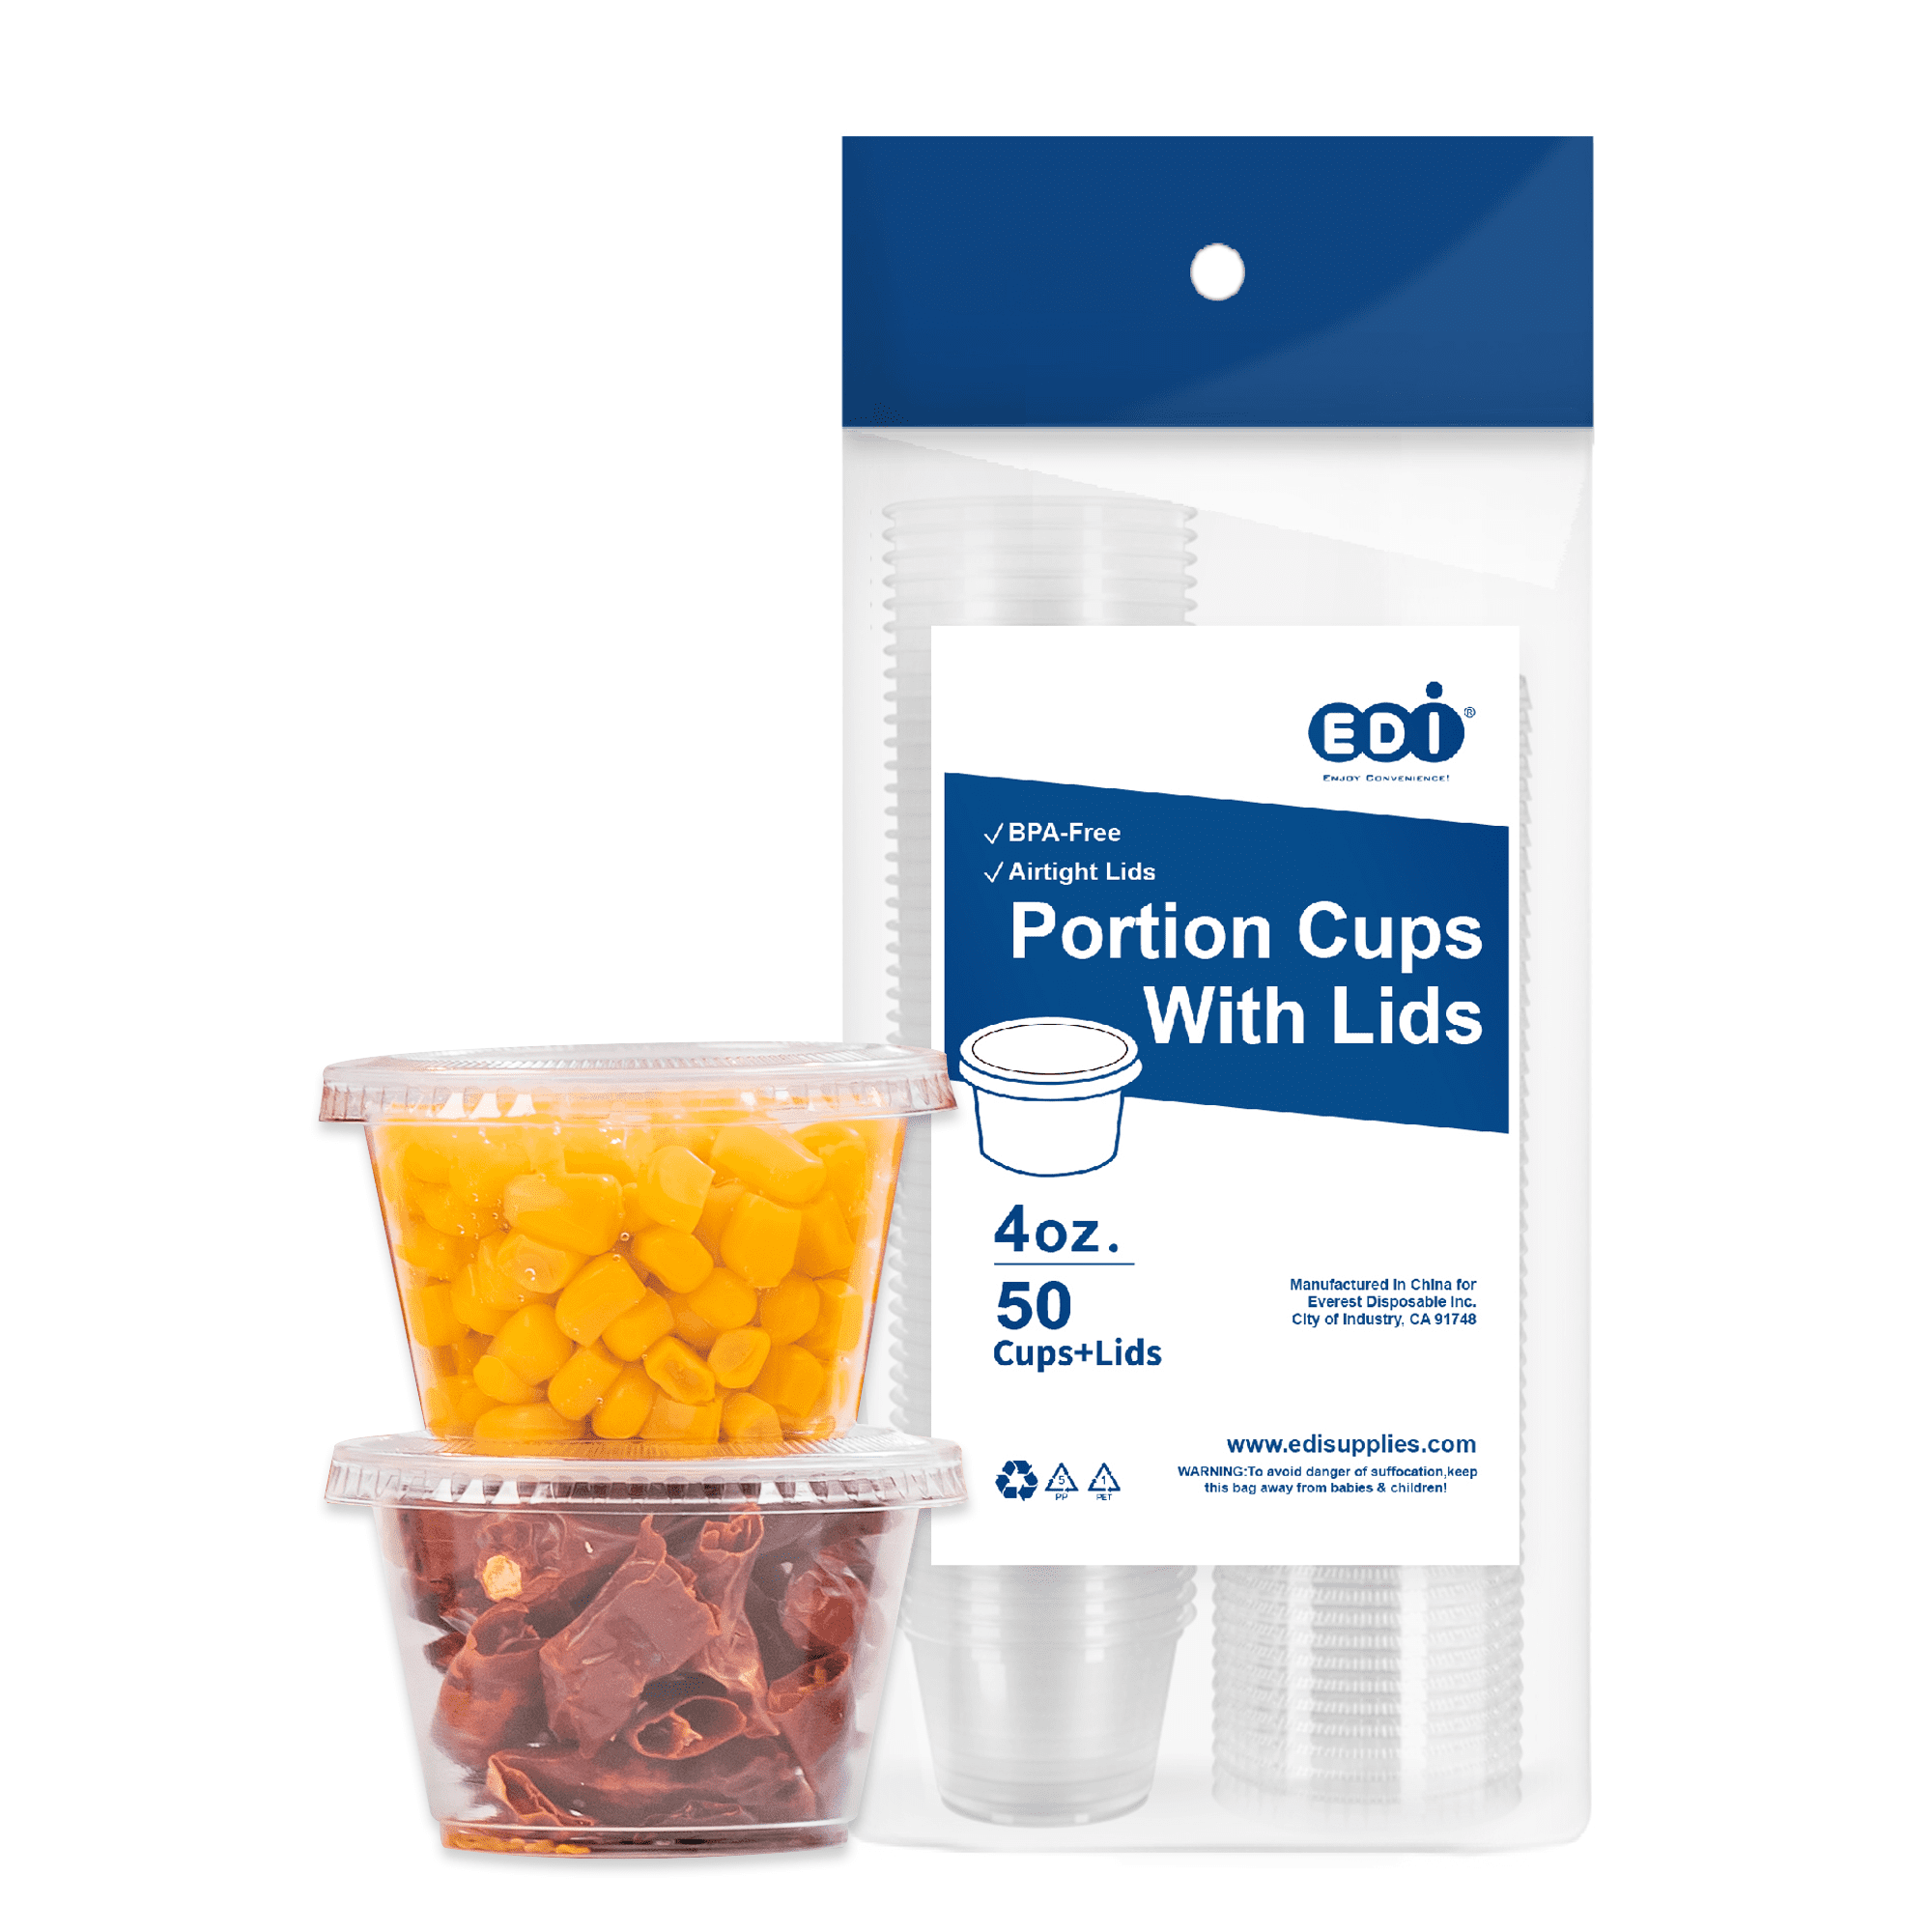 Pantry Value [100 Sets - 3.25 oz. ] Cups with Lids, Small Plastic Condiment Containers for Sauce, Salad Dressings, Ramekins, & Portion Control